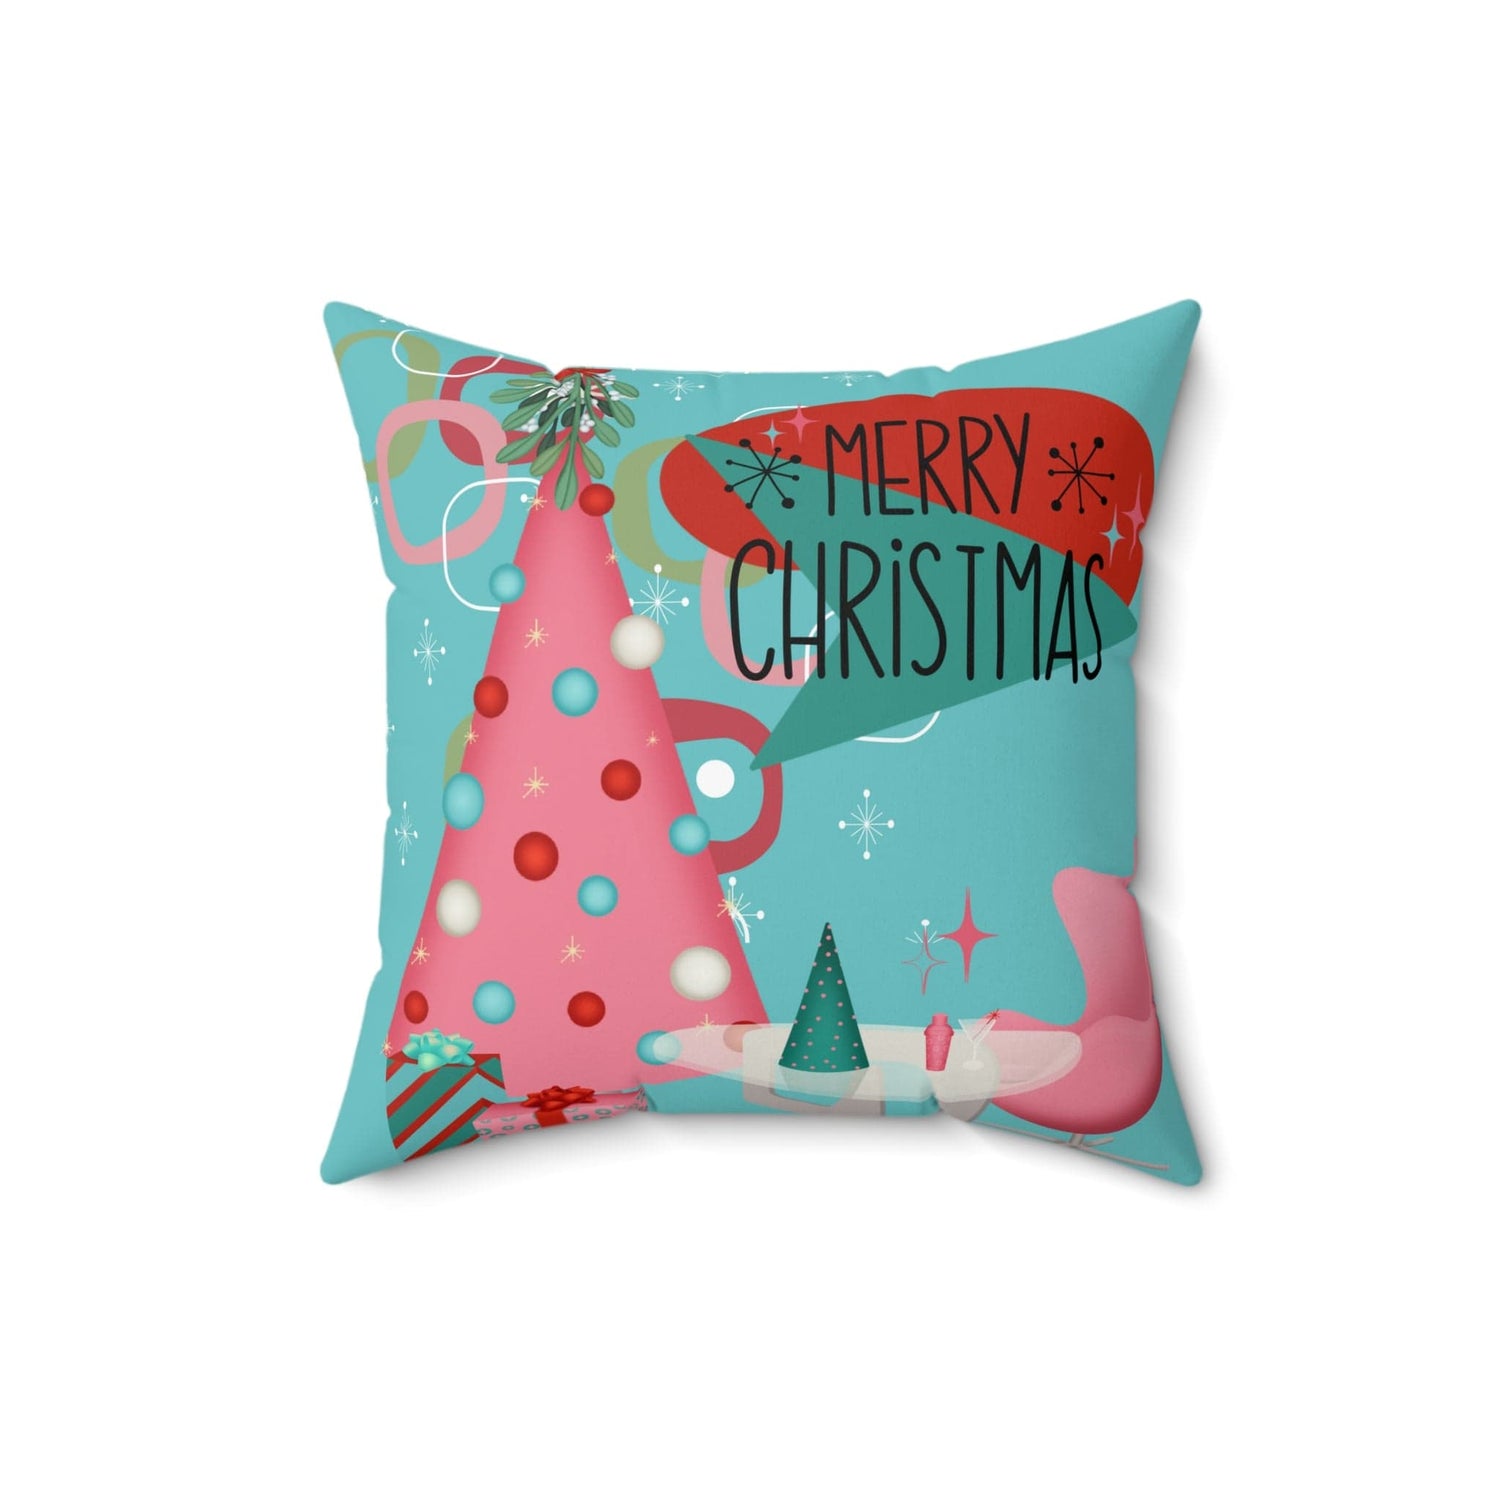 Mid Century Modern Christmas Pillow, Aqua Pink, Whimsical Holiday Kitsch Polyester Square Pillow Home Decor